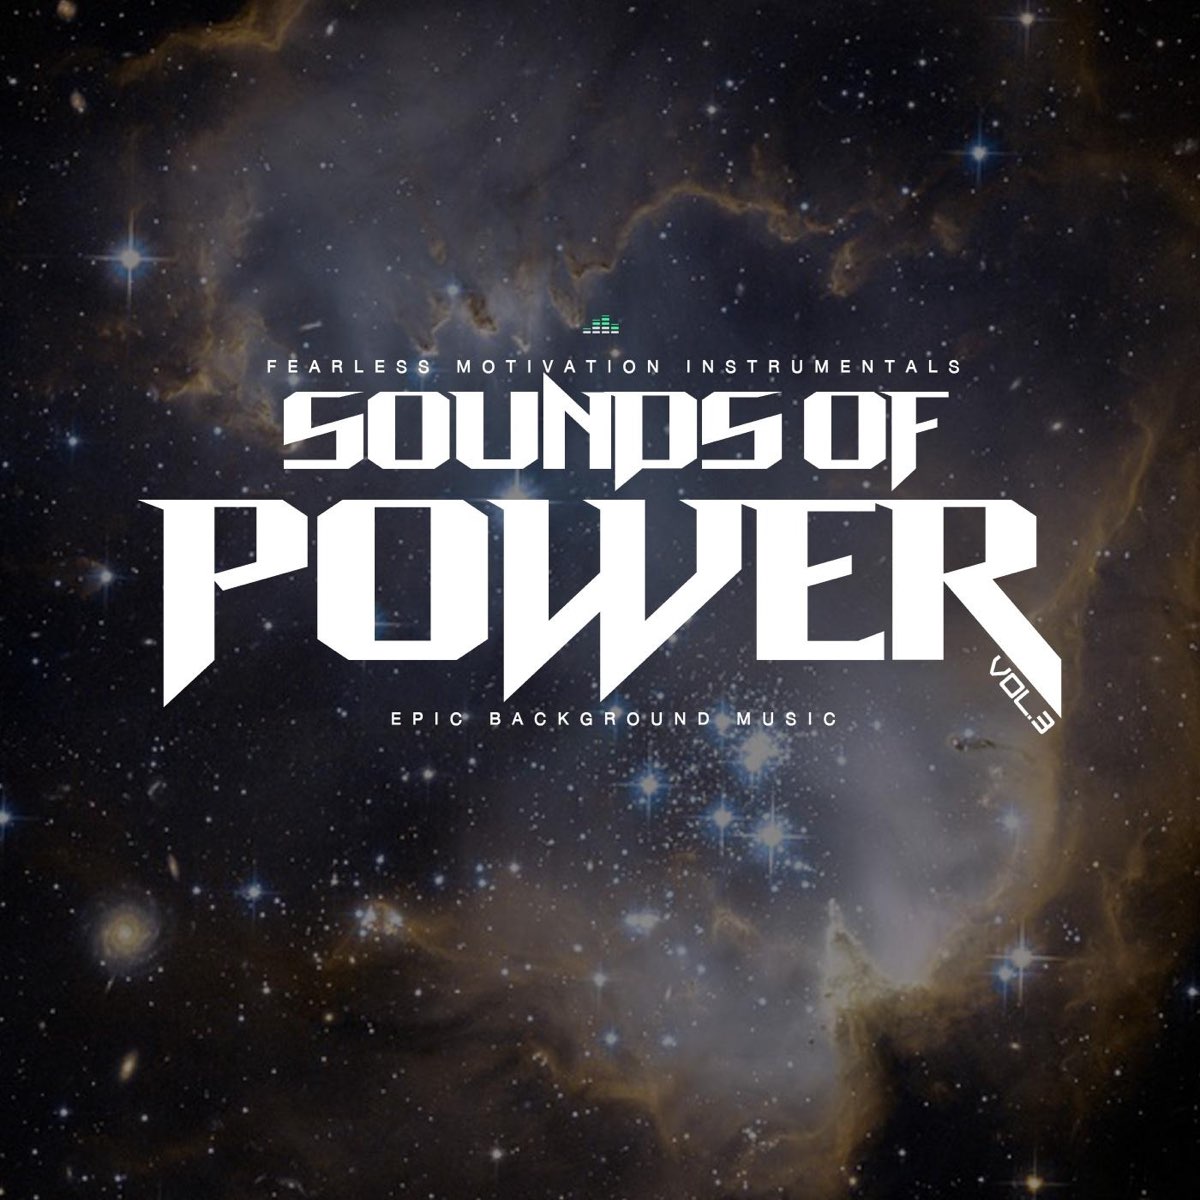 Sounds of Power Epic Background Music, Vol. 3 của Fearless Motivation  Instrumentals trên Apple Music